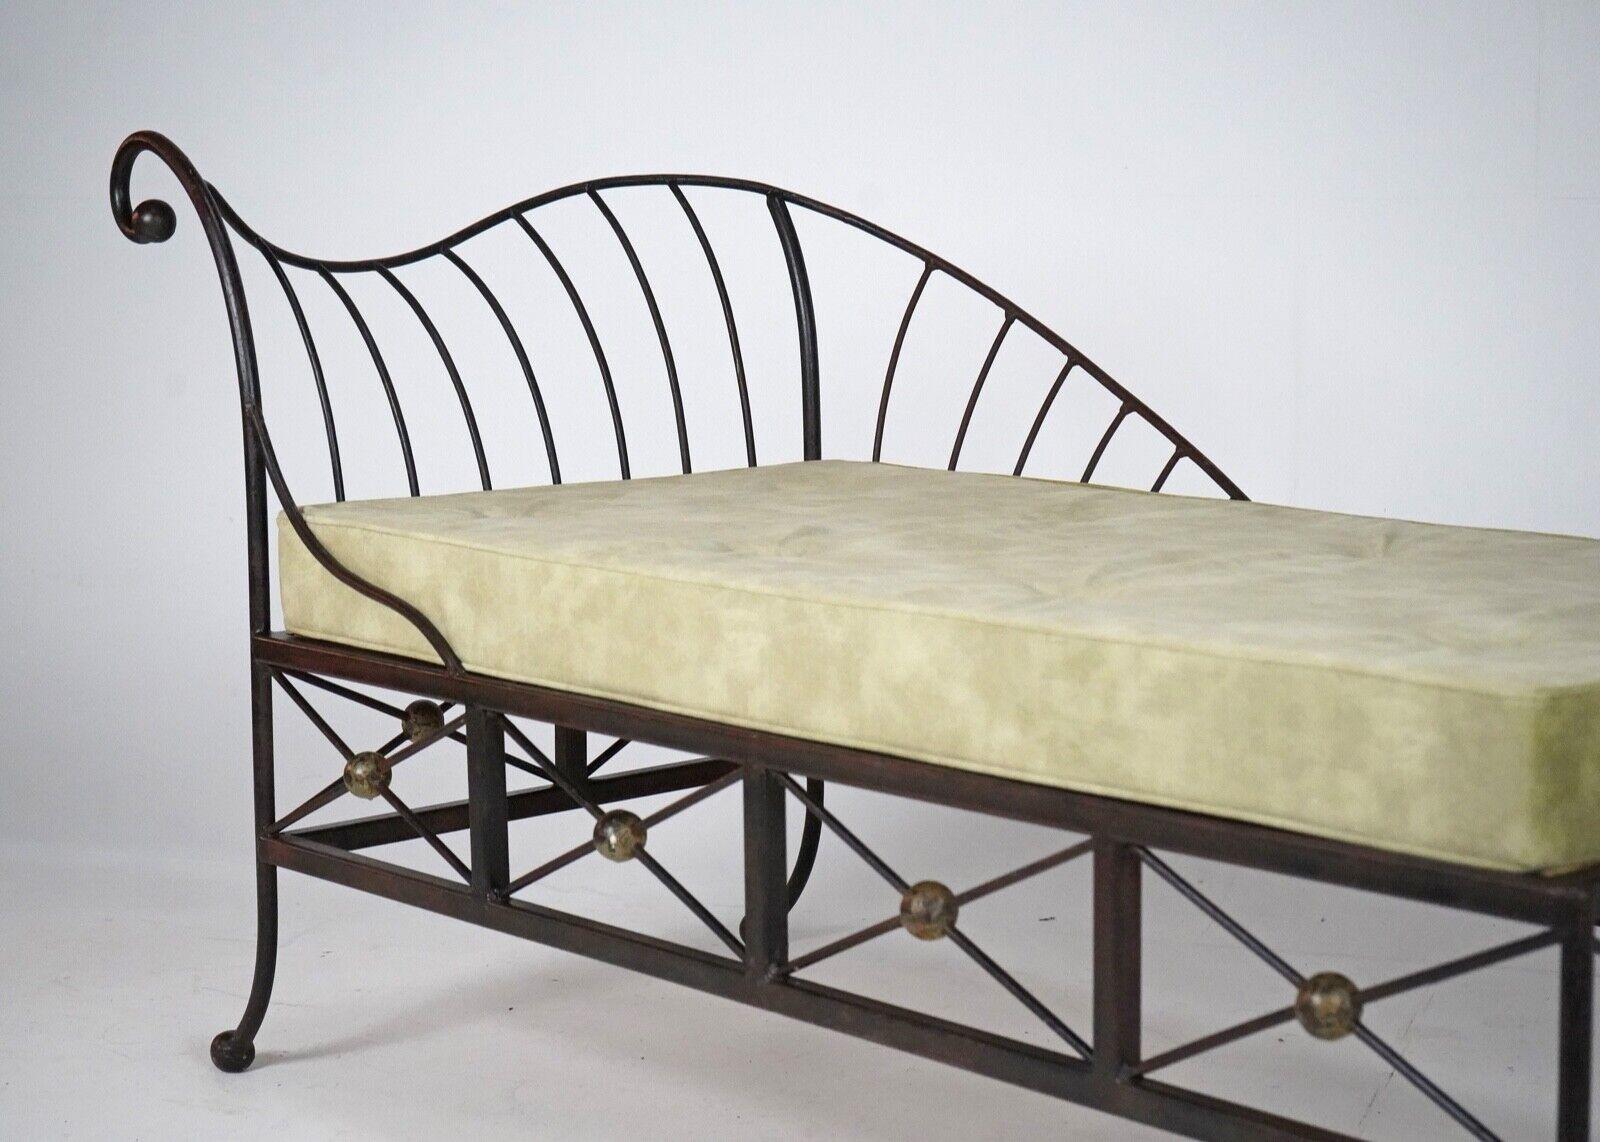 20ième siècle Vintage French Box Steel Metal Day Bed, Sun Lounger, Chaise Lounge Green Seat